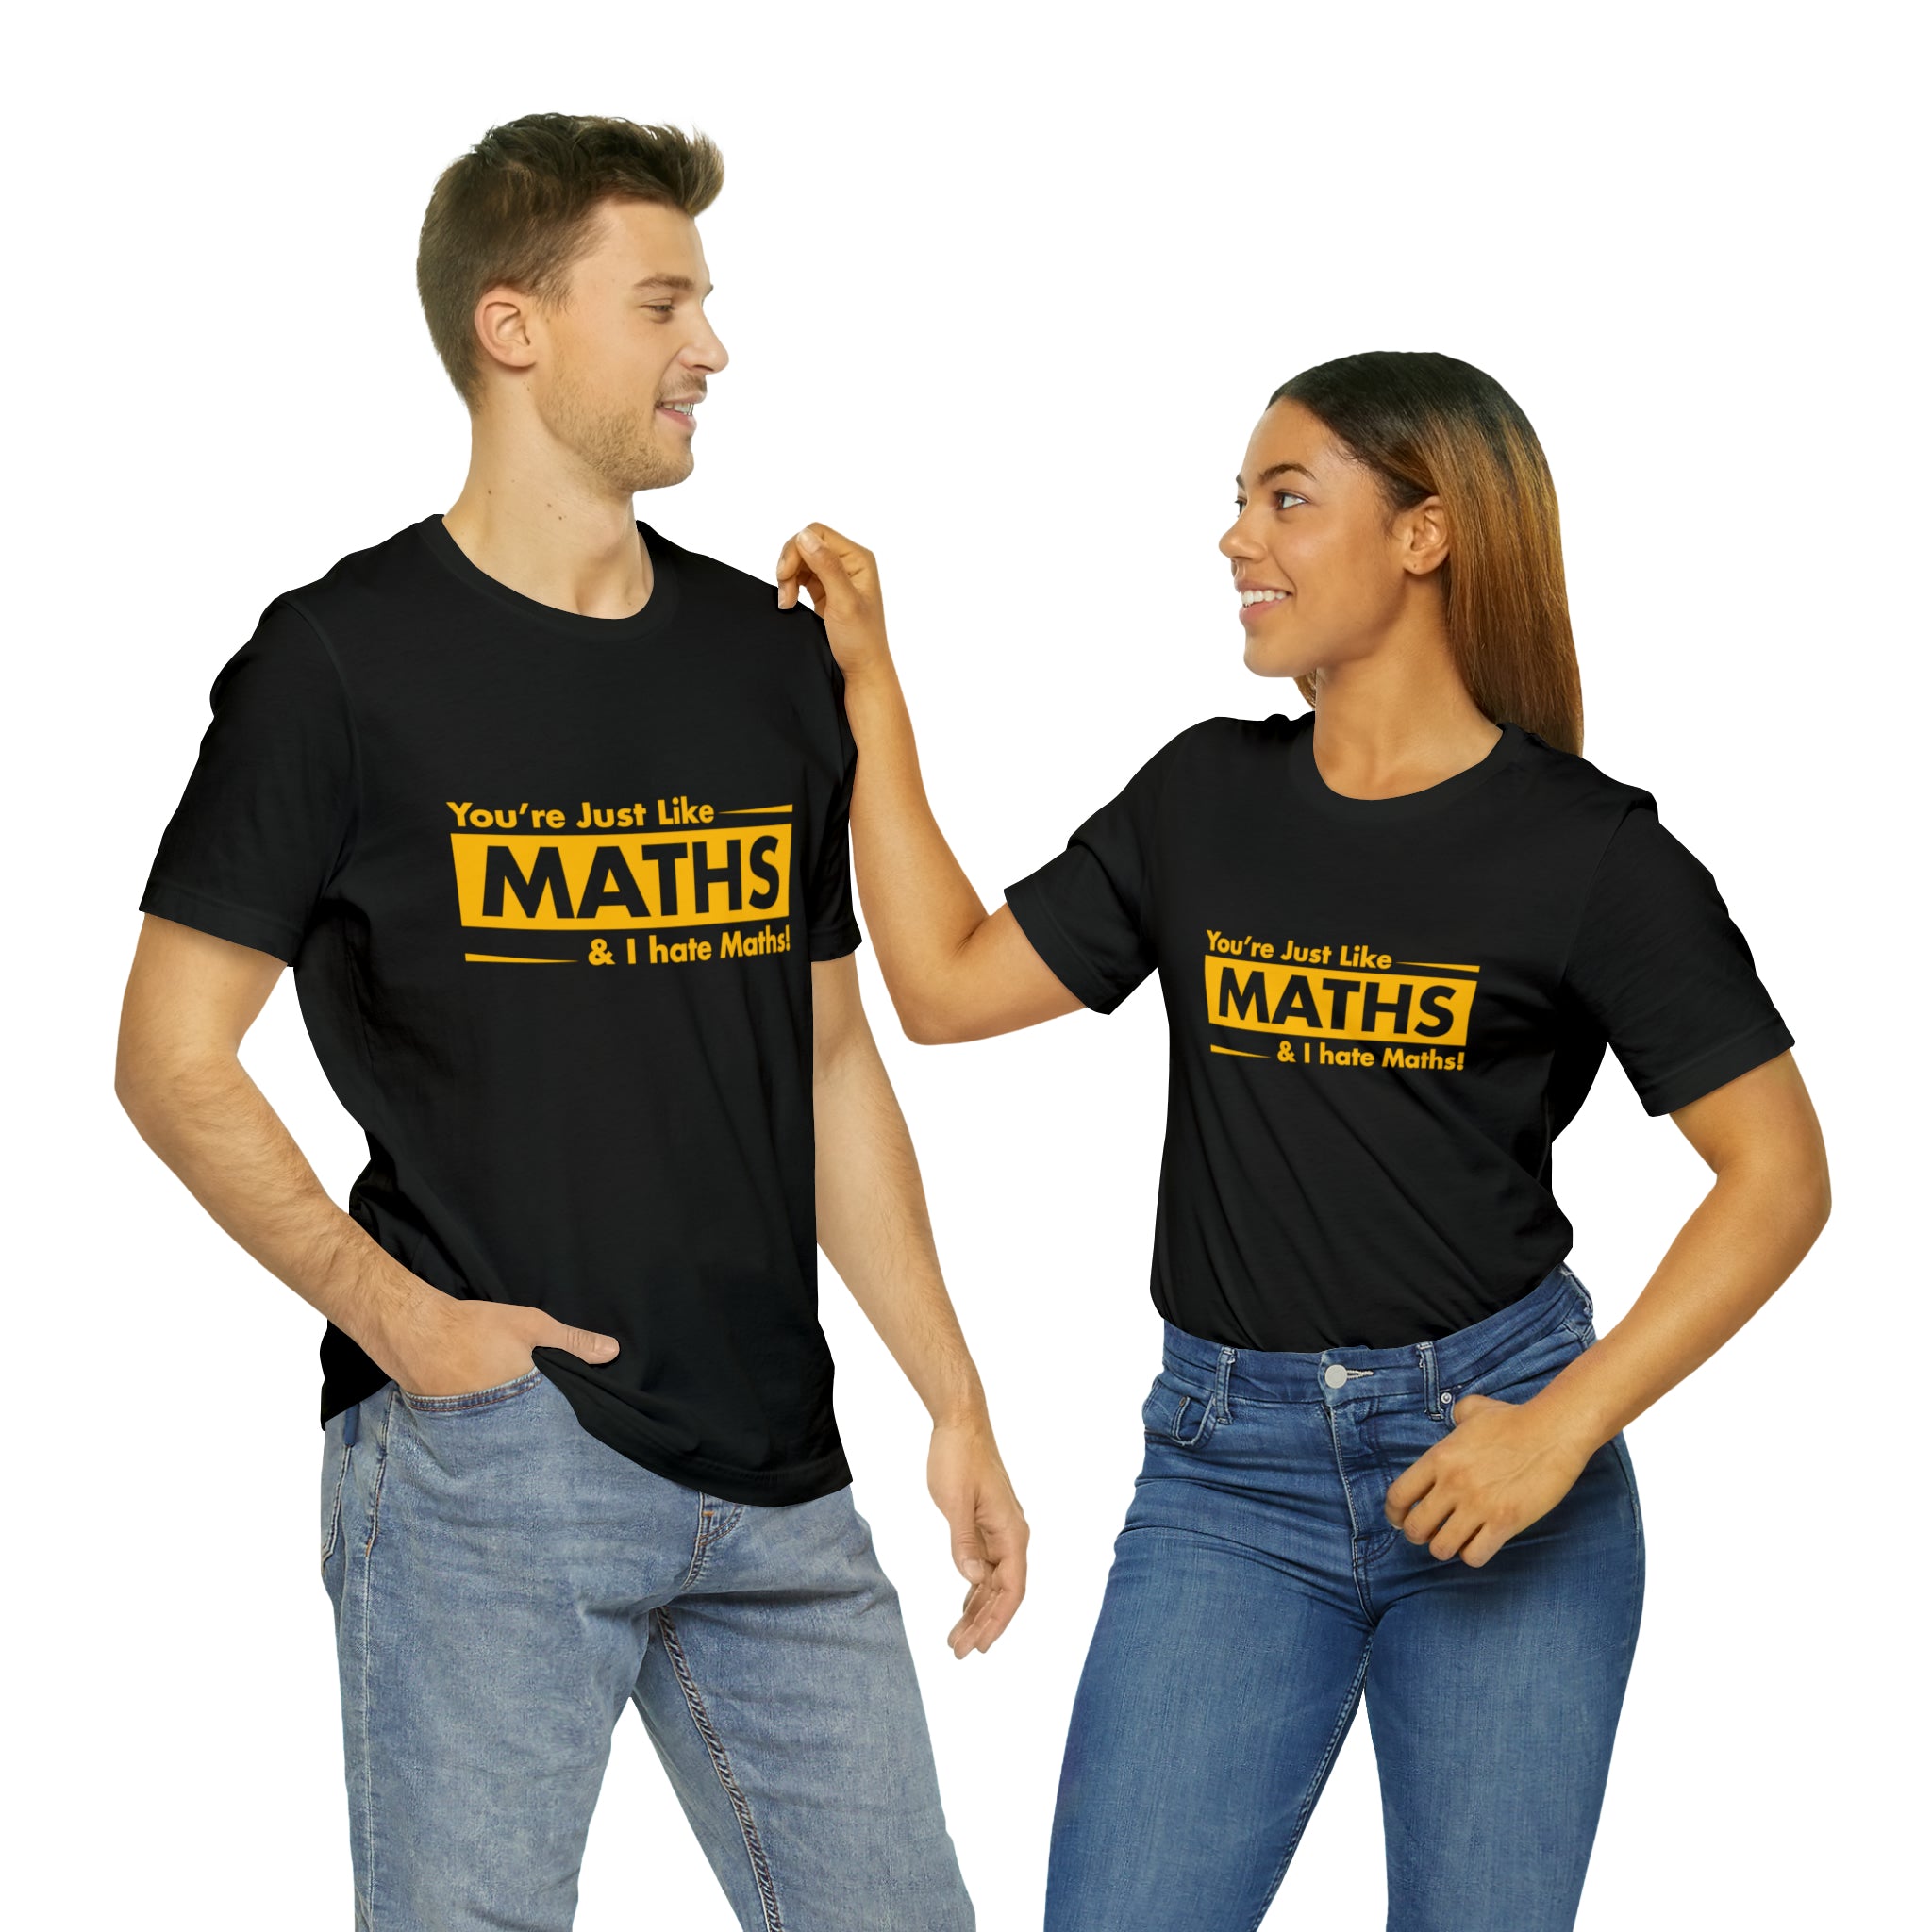 A man and woman flaunting their fashion sense, standing side by side in black T-shirts that boldly display the word "You are just like maths and I hate maths.